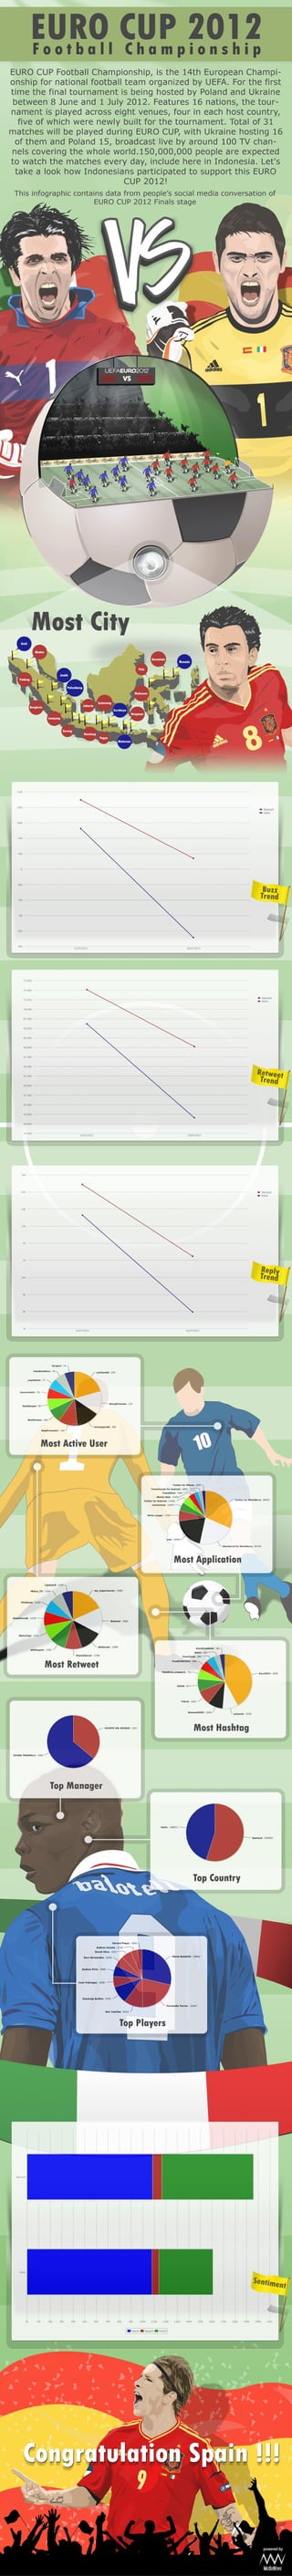 Euro Cup 2012 Infographic - Part IV